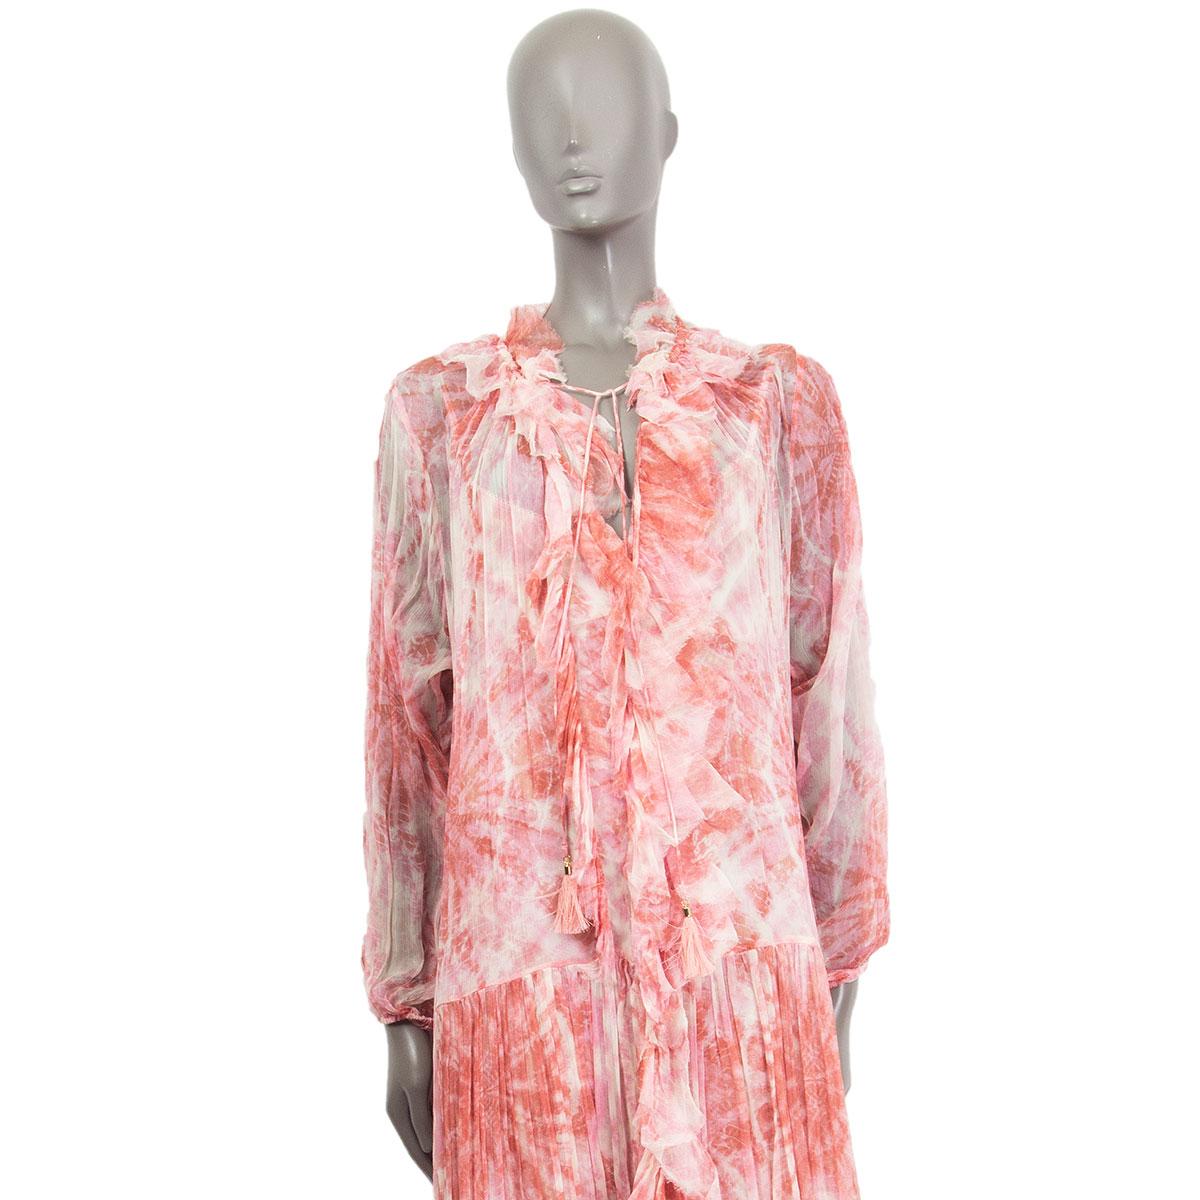 authentic Zimmermann batik dress in brick, rose and off-white silk-chiffon (100%) with a loosely fit, flowy fabric, V-neckline, detailed ruffled hemline, long sleeves, elastic sleeve cuffs and a cut-out in the front. Lined in a fitted underdress